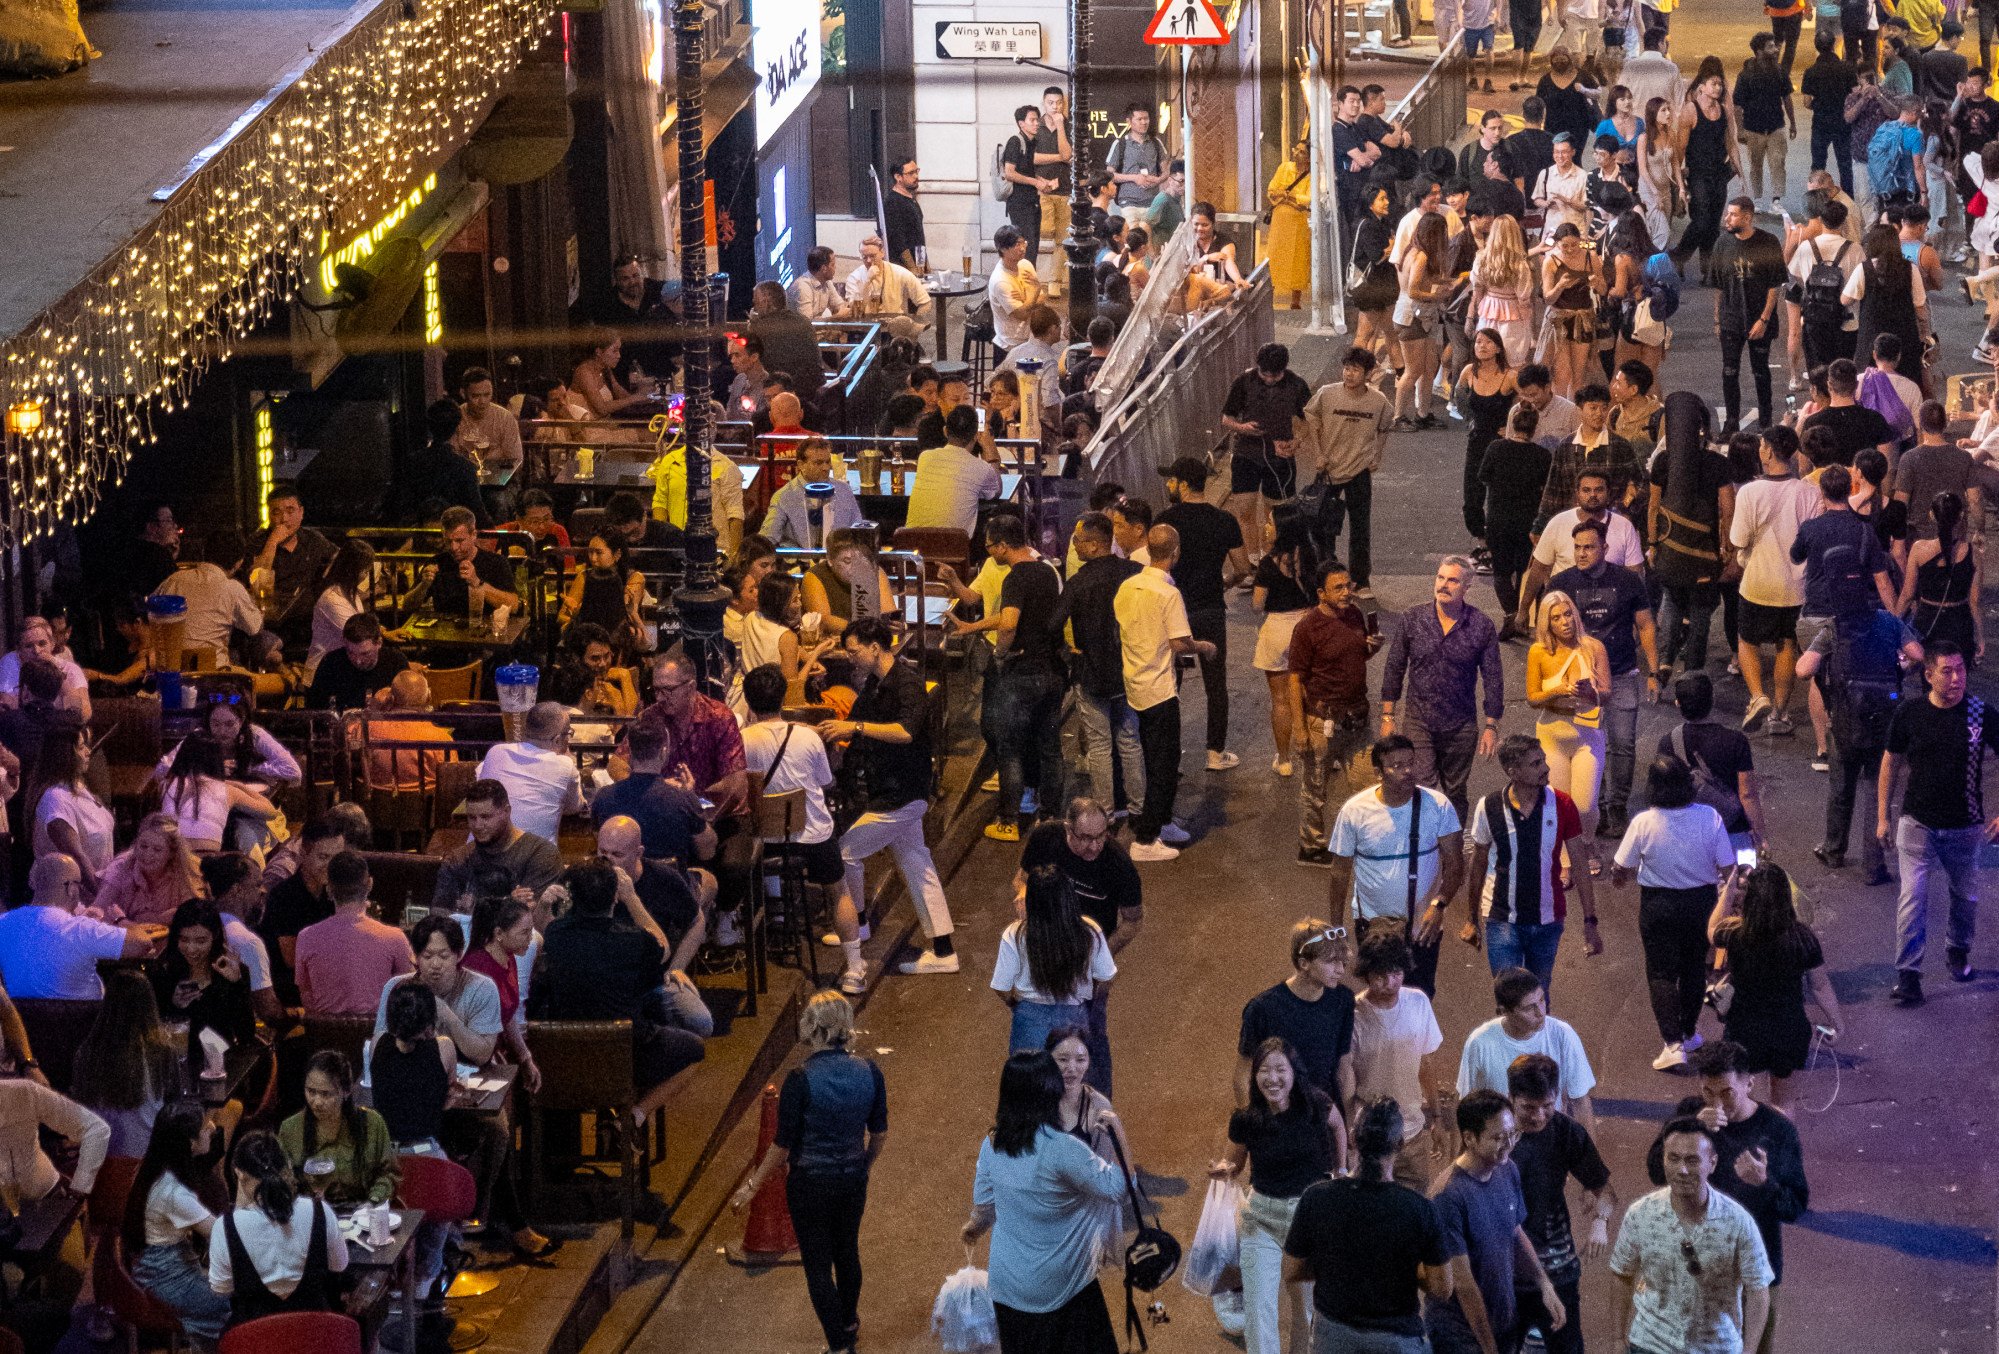 Crowds have returned to Lan Kwai Fong. Photo: Connor Mycroft